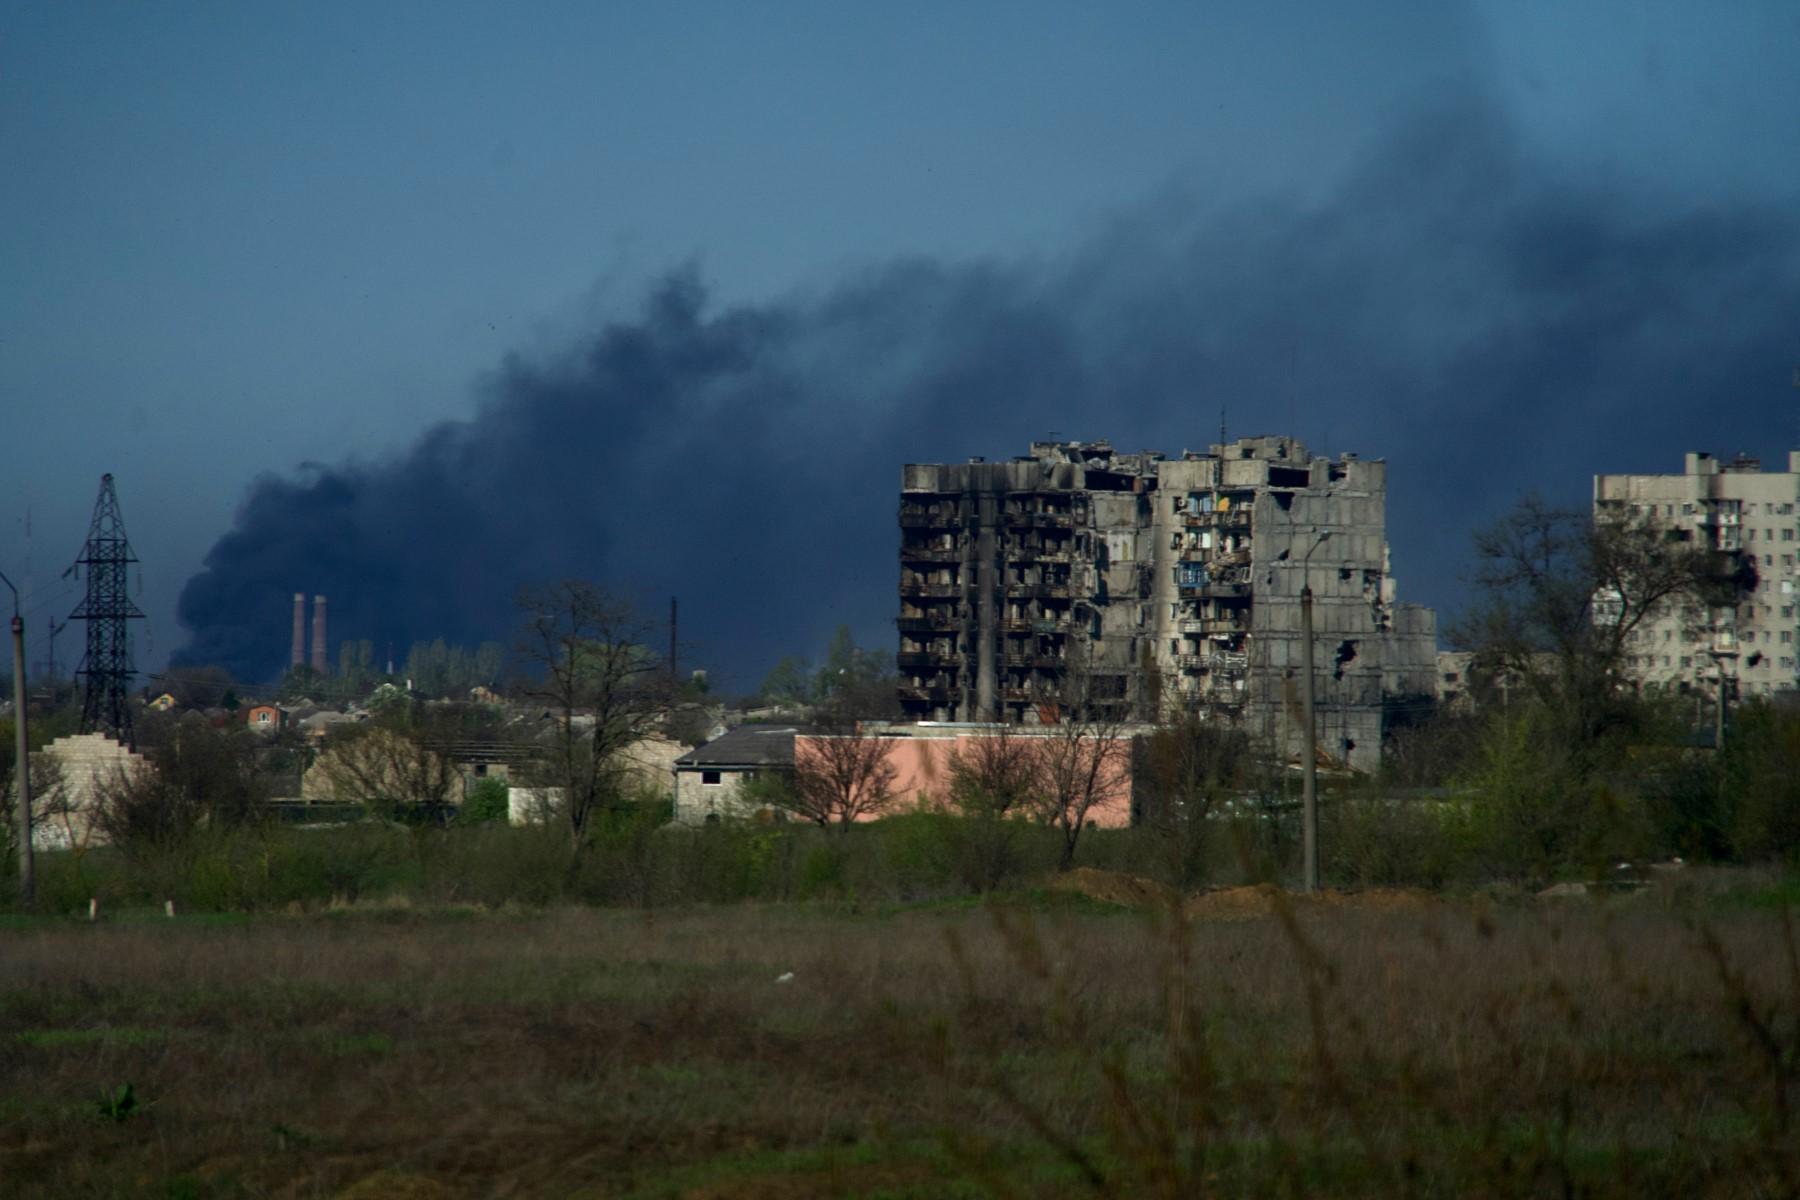 Smoke rises from the grounds of the Azovstal steel plant in the city of Mariupol on April 29 amid the ongoing Russian military action in Ukraine. Photo: AFP